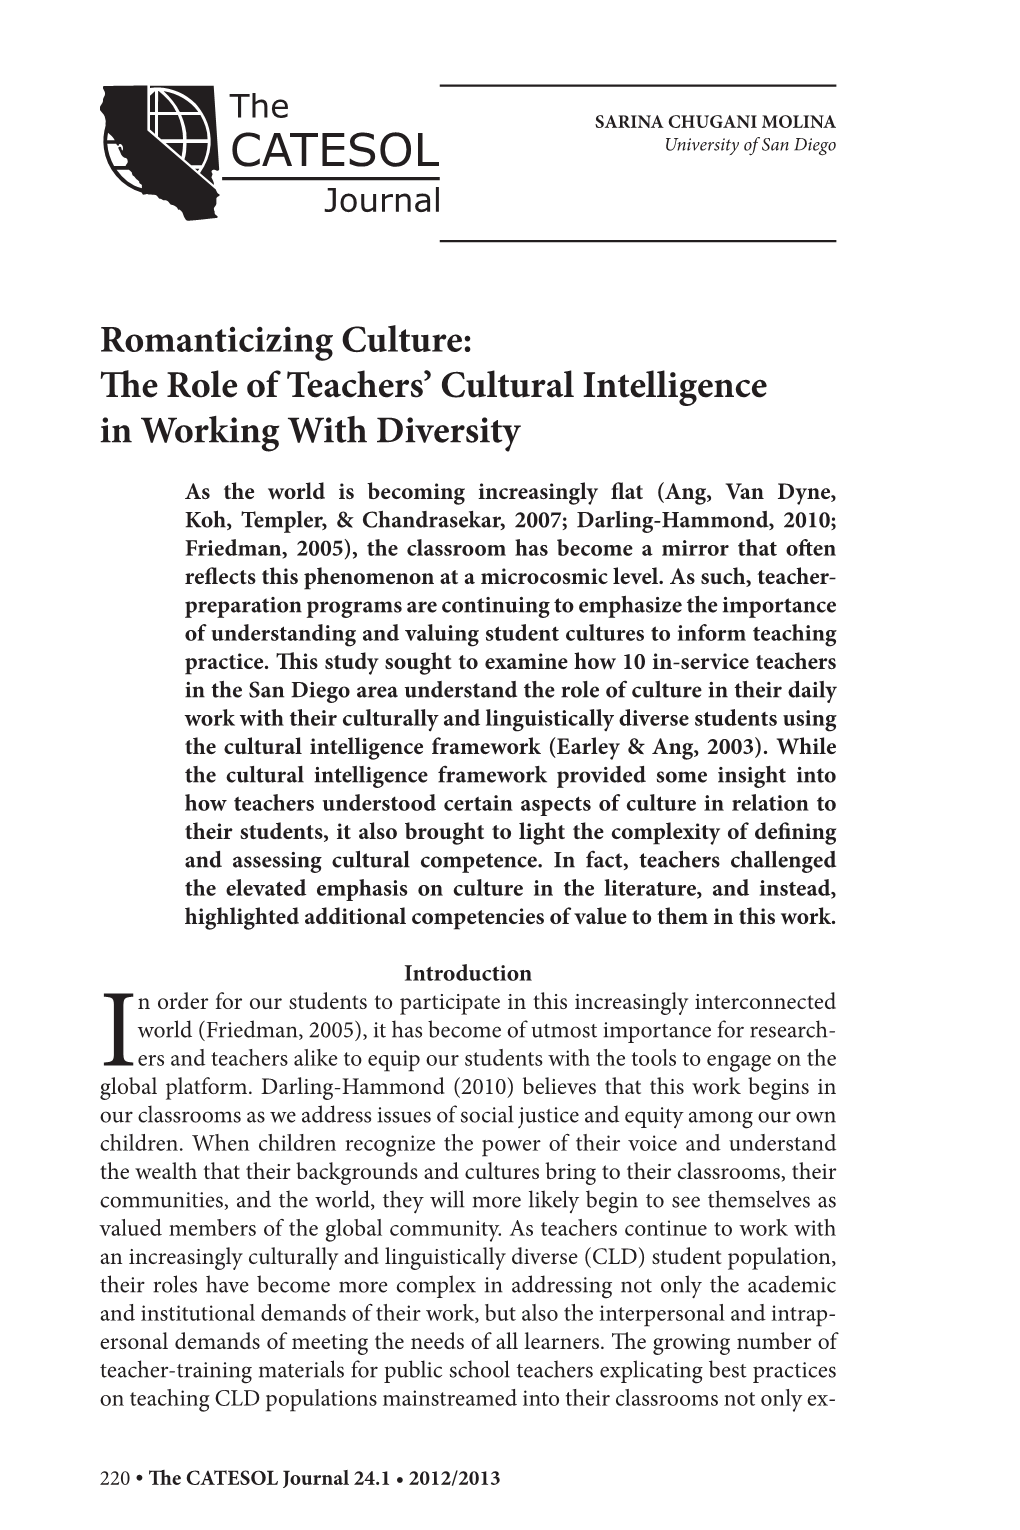 Romanticizing Culture: the Role of Teachers' Cultural Intelligence in Working with Diversity